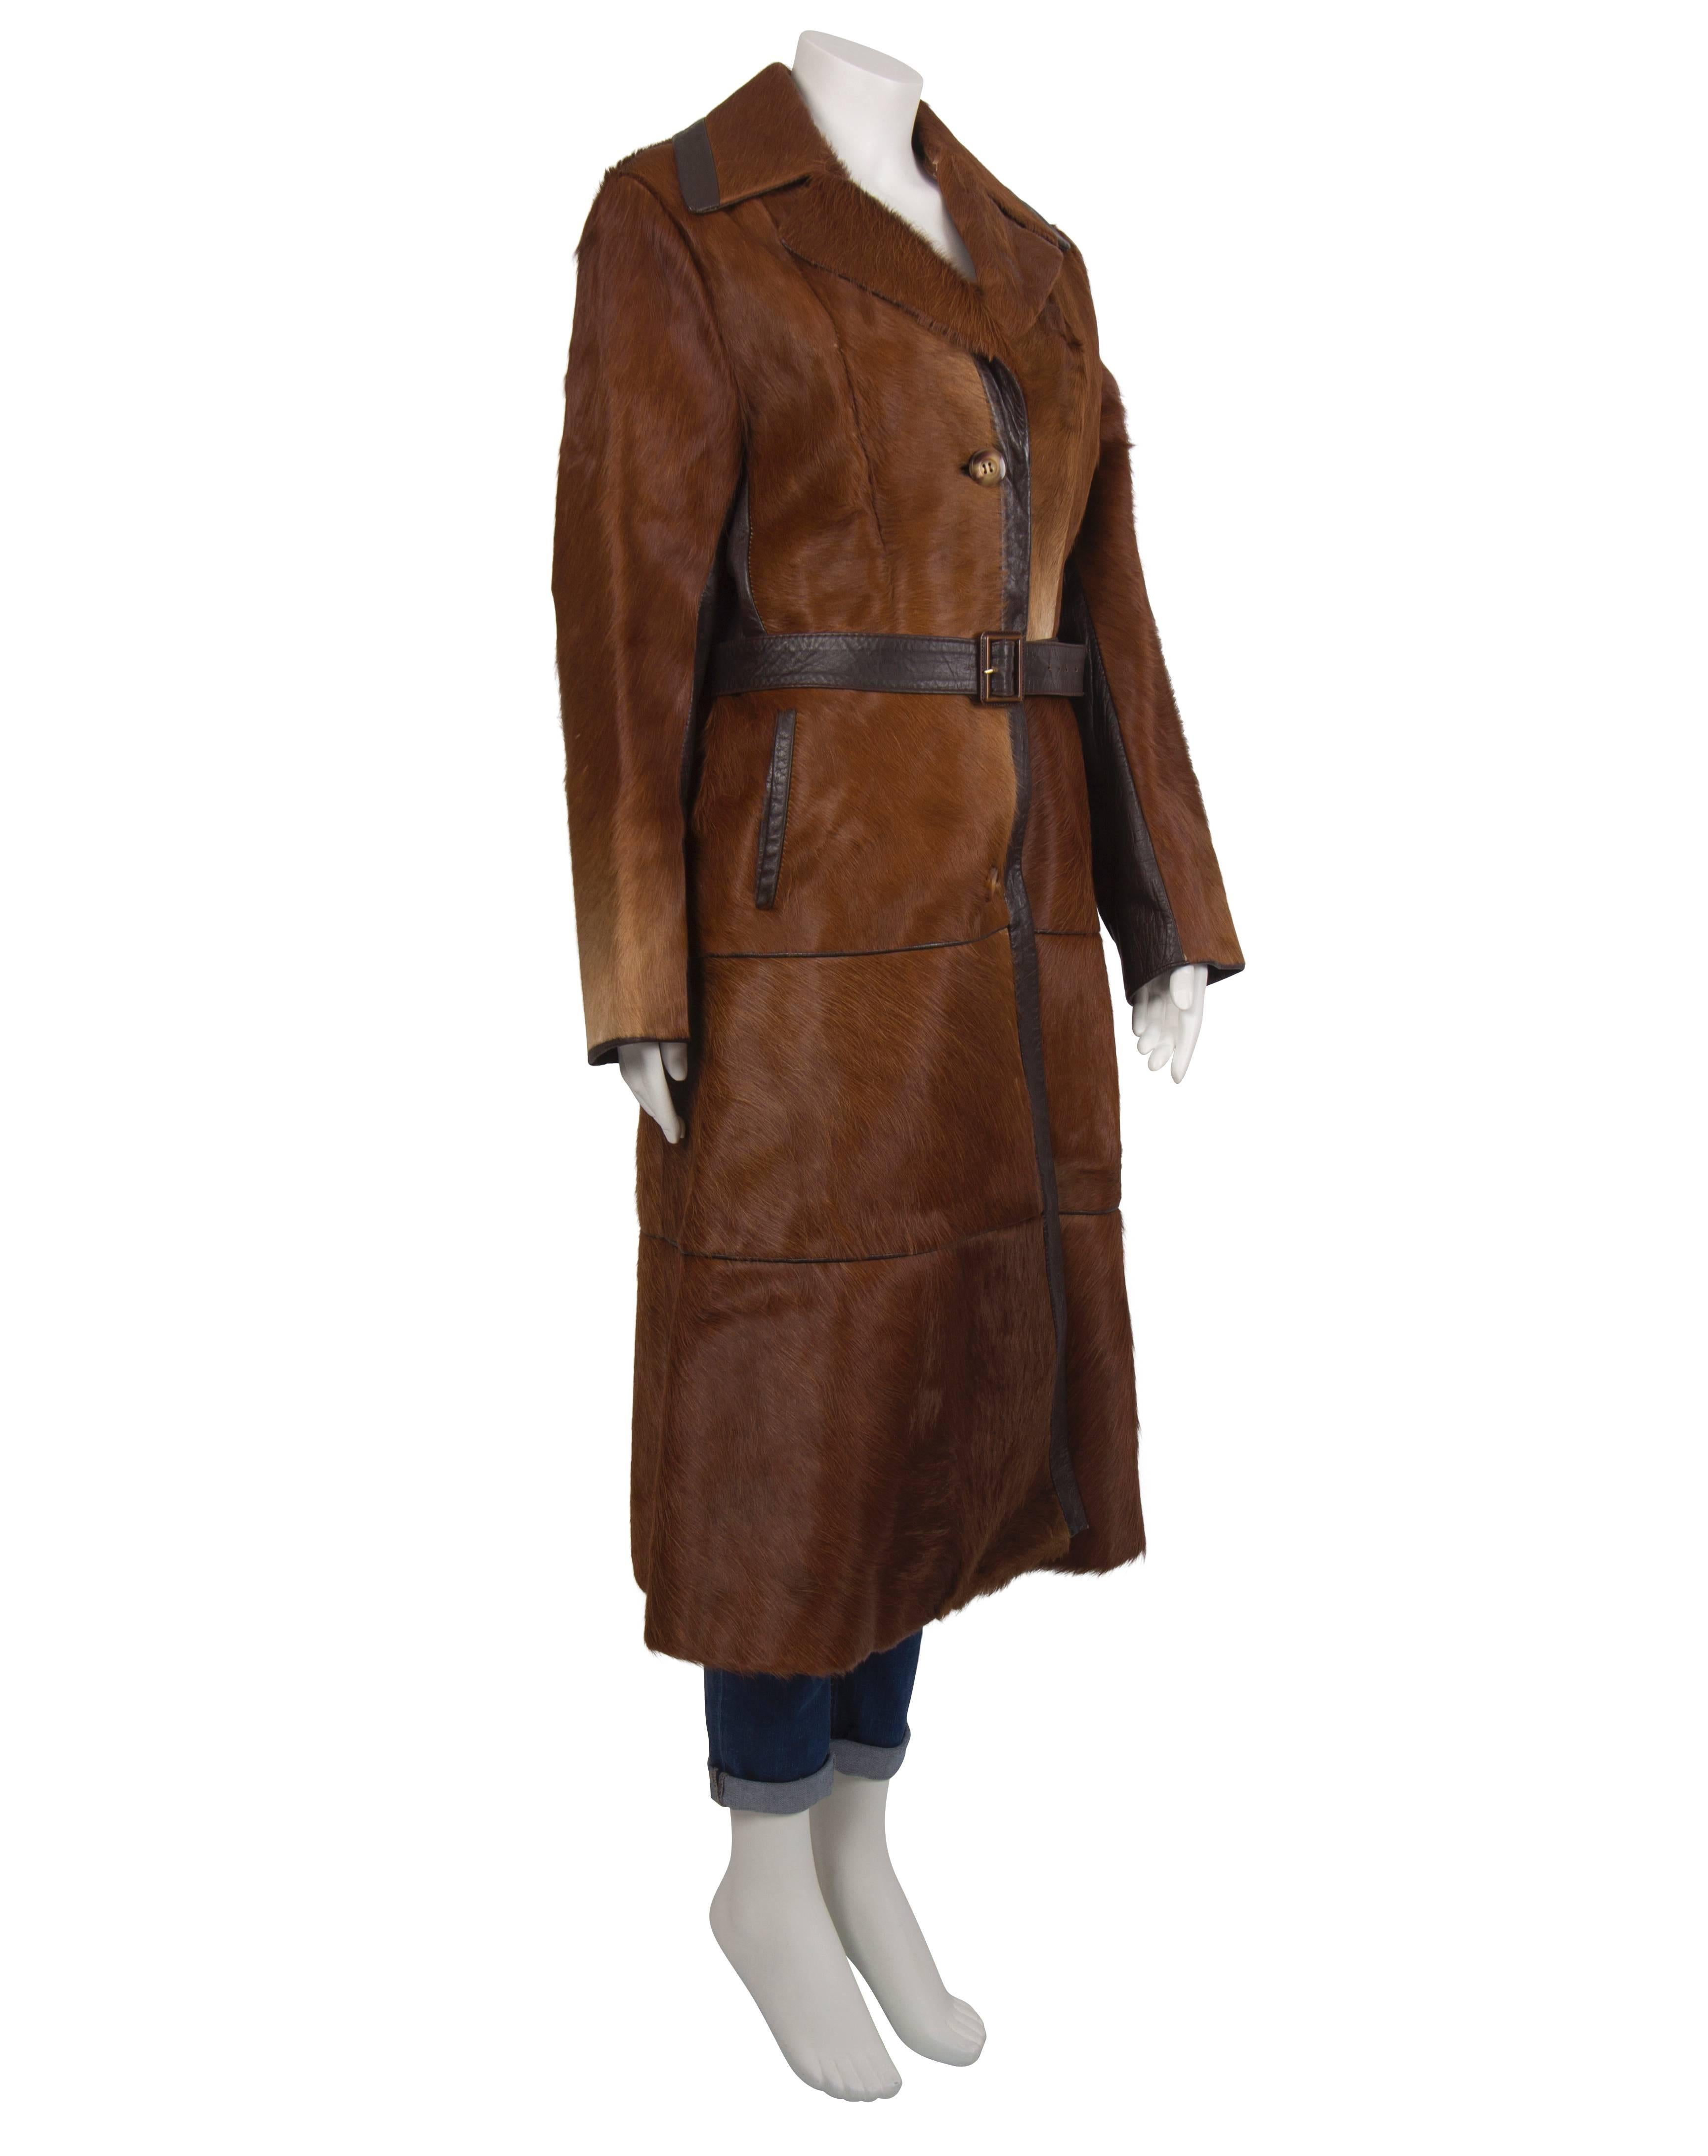 1970's brown pony skin trench coat. The coat buttons on the front with 3 leather covered buttons and the inner side of the sleeves present a dark brown leather insert. Additional features are two pockets on either side along the hip line and a dark